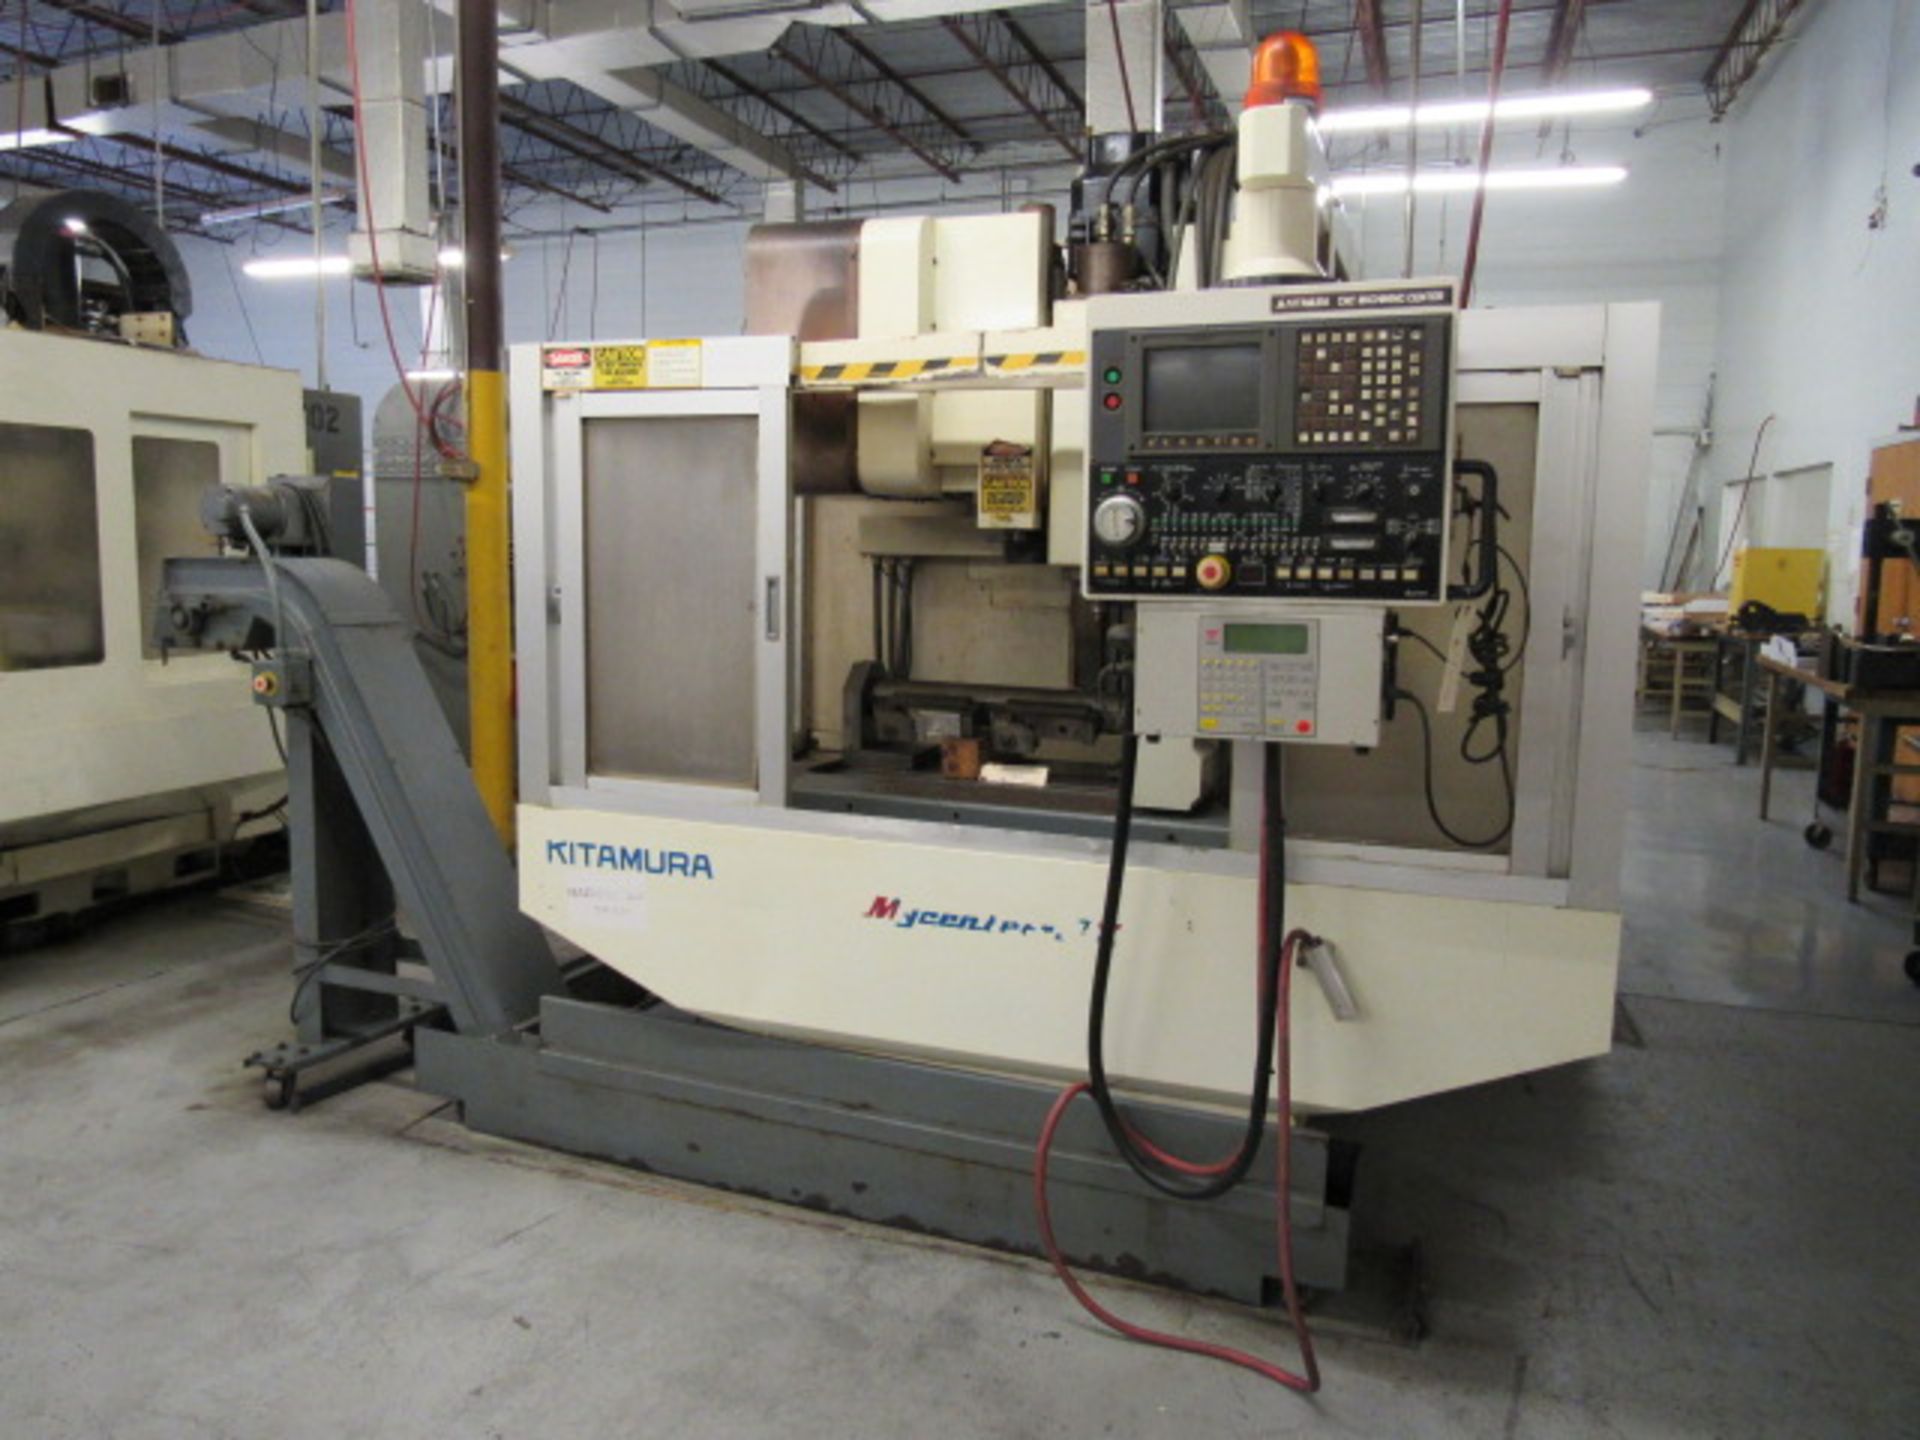 Kitamura MyCenter 3X Wired for 4th Axis CNC Vertical Machining Center - Image 3 of 8